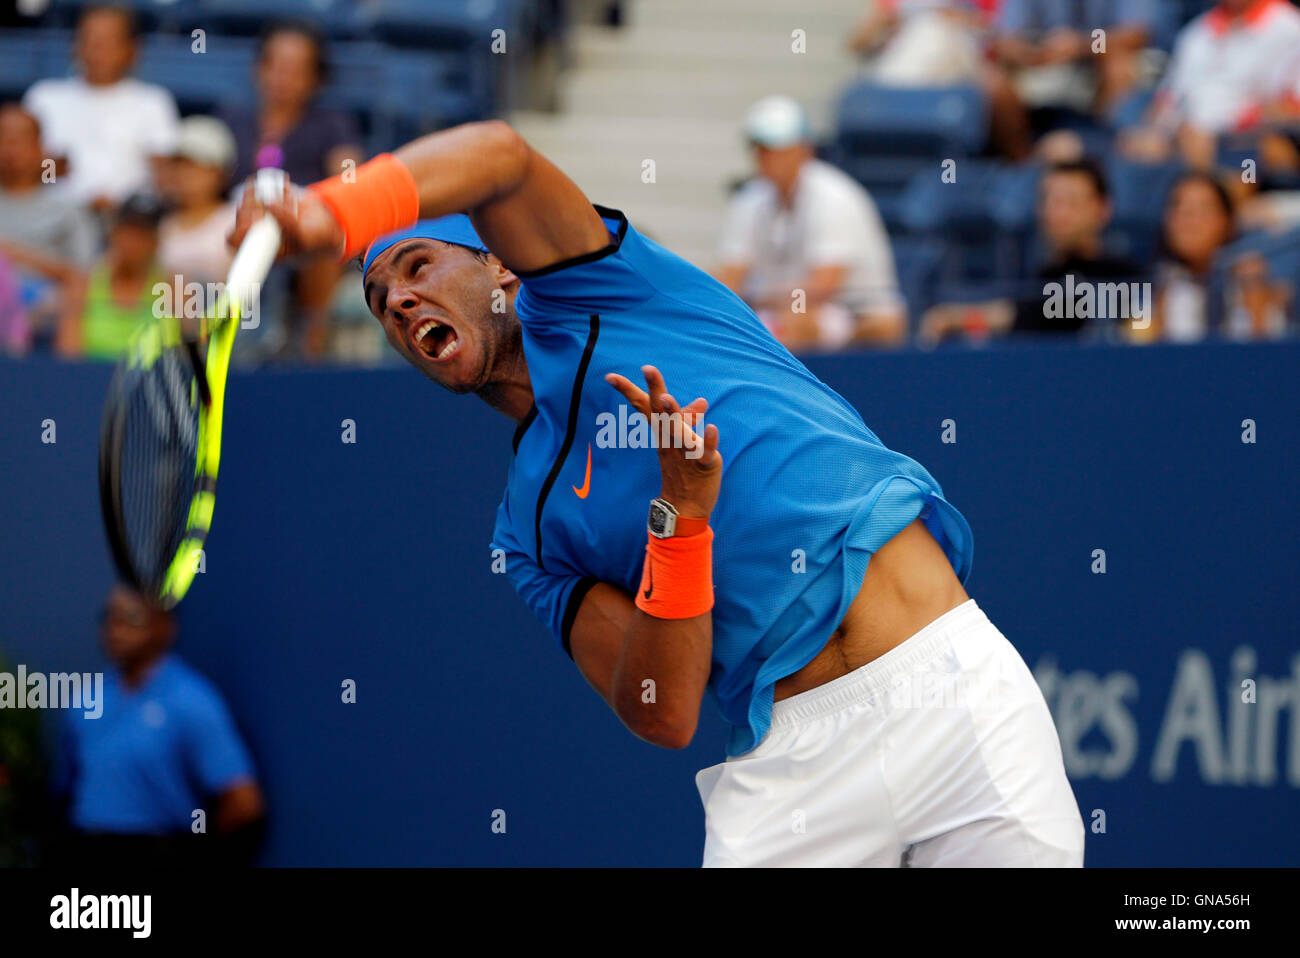 New York, USA. 29th Aug, 2016. Spain's Rafael Nadal in action during his first round match against Denis Istomin of Uzbekistan in the first round of the U.S. Open Tennis Championships at Flushing Meadows, New York on Monday, August 29th. Credit:  Adam Stoltman/Alamy Live News Stock Photo